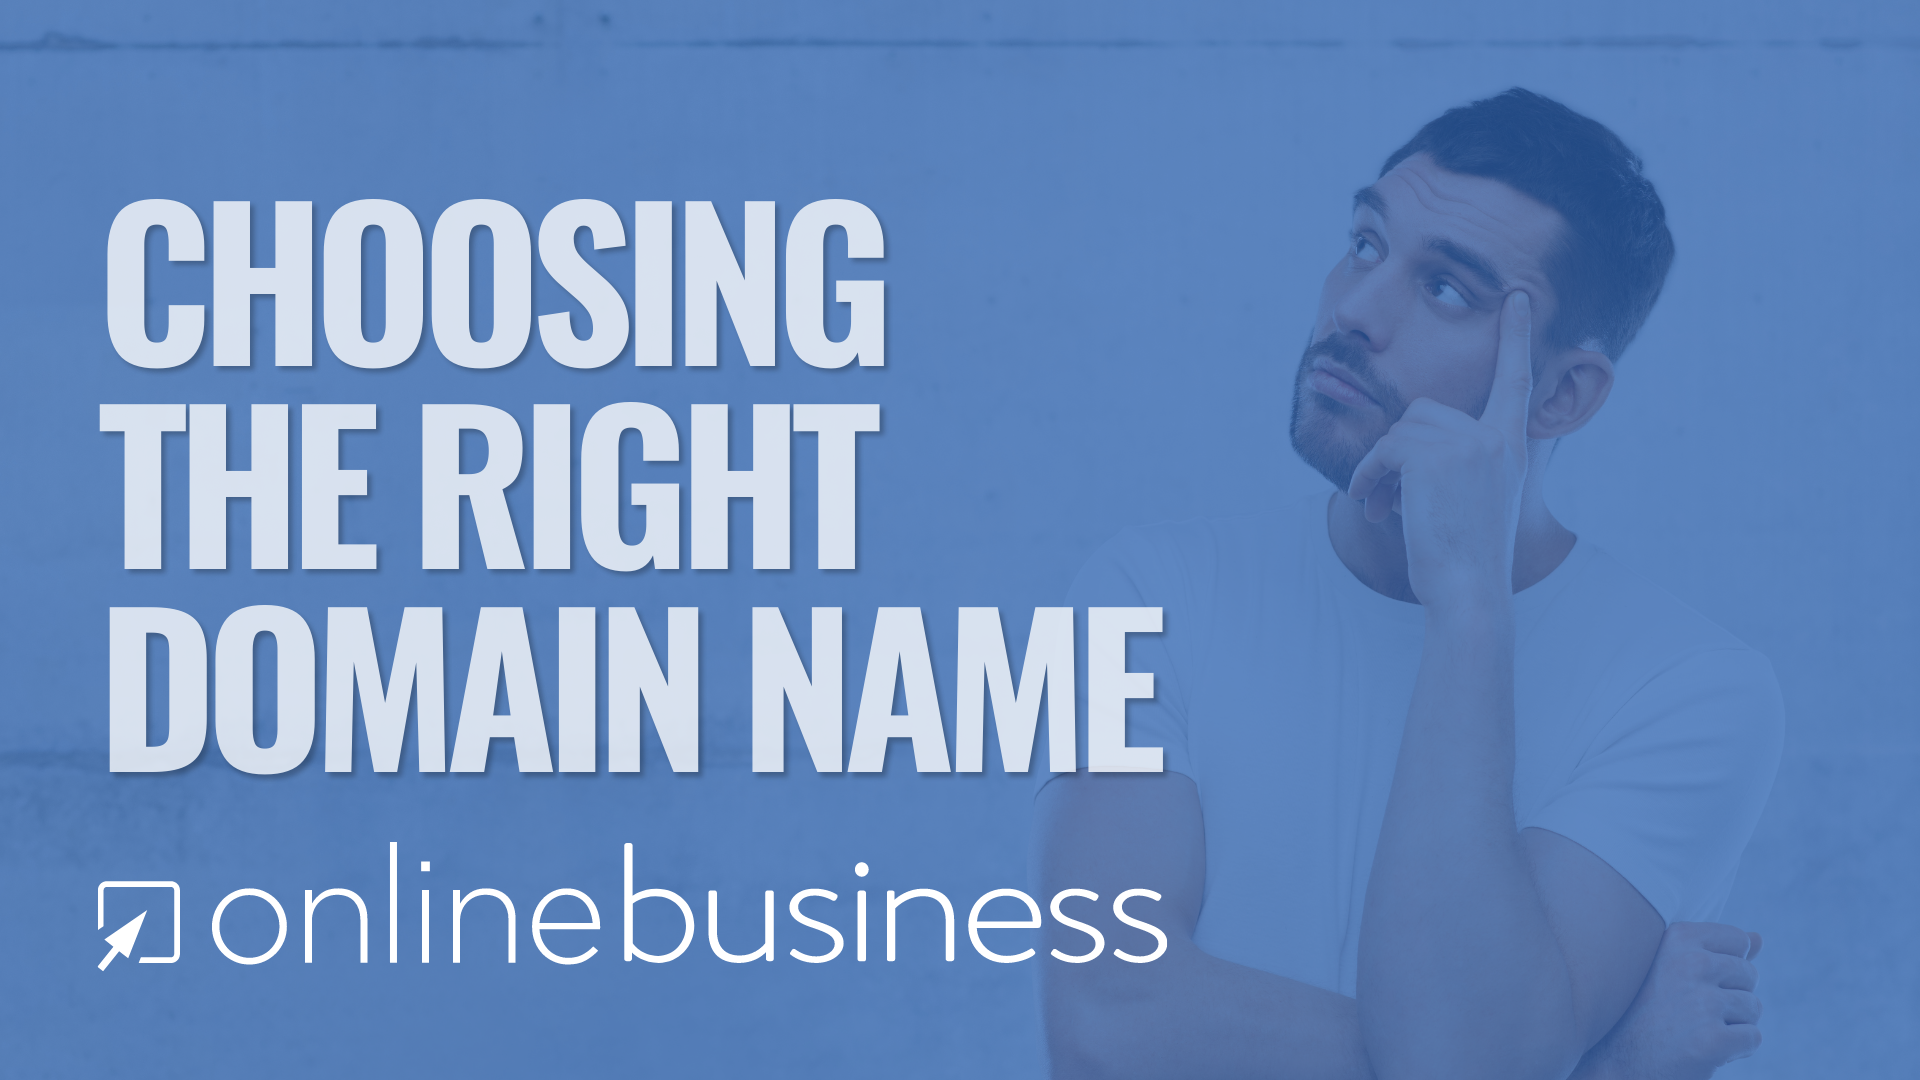 OnlineBusiness.com Highlights Why The Right Domain Starts with The Right Company Name